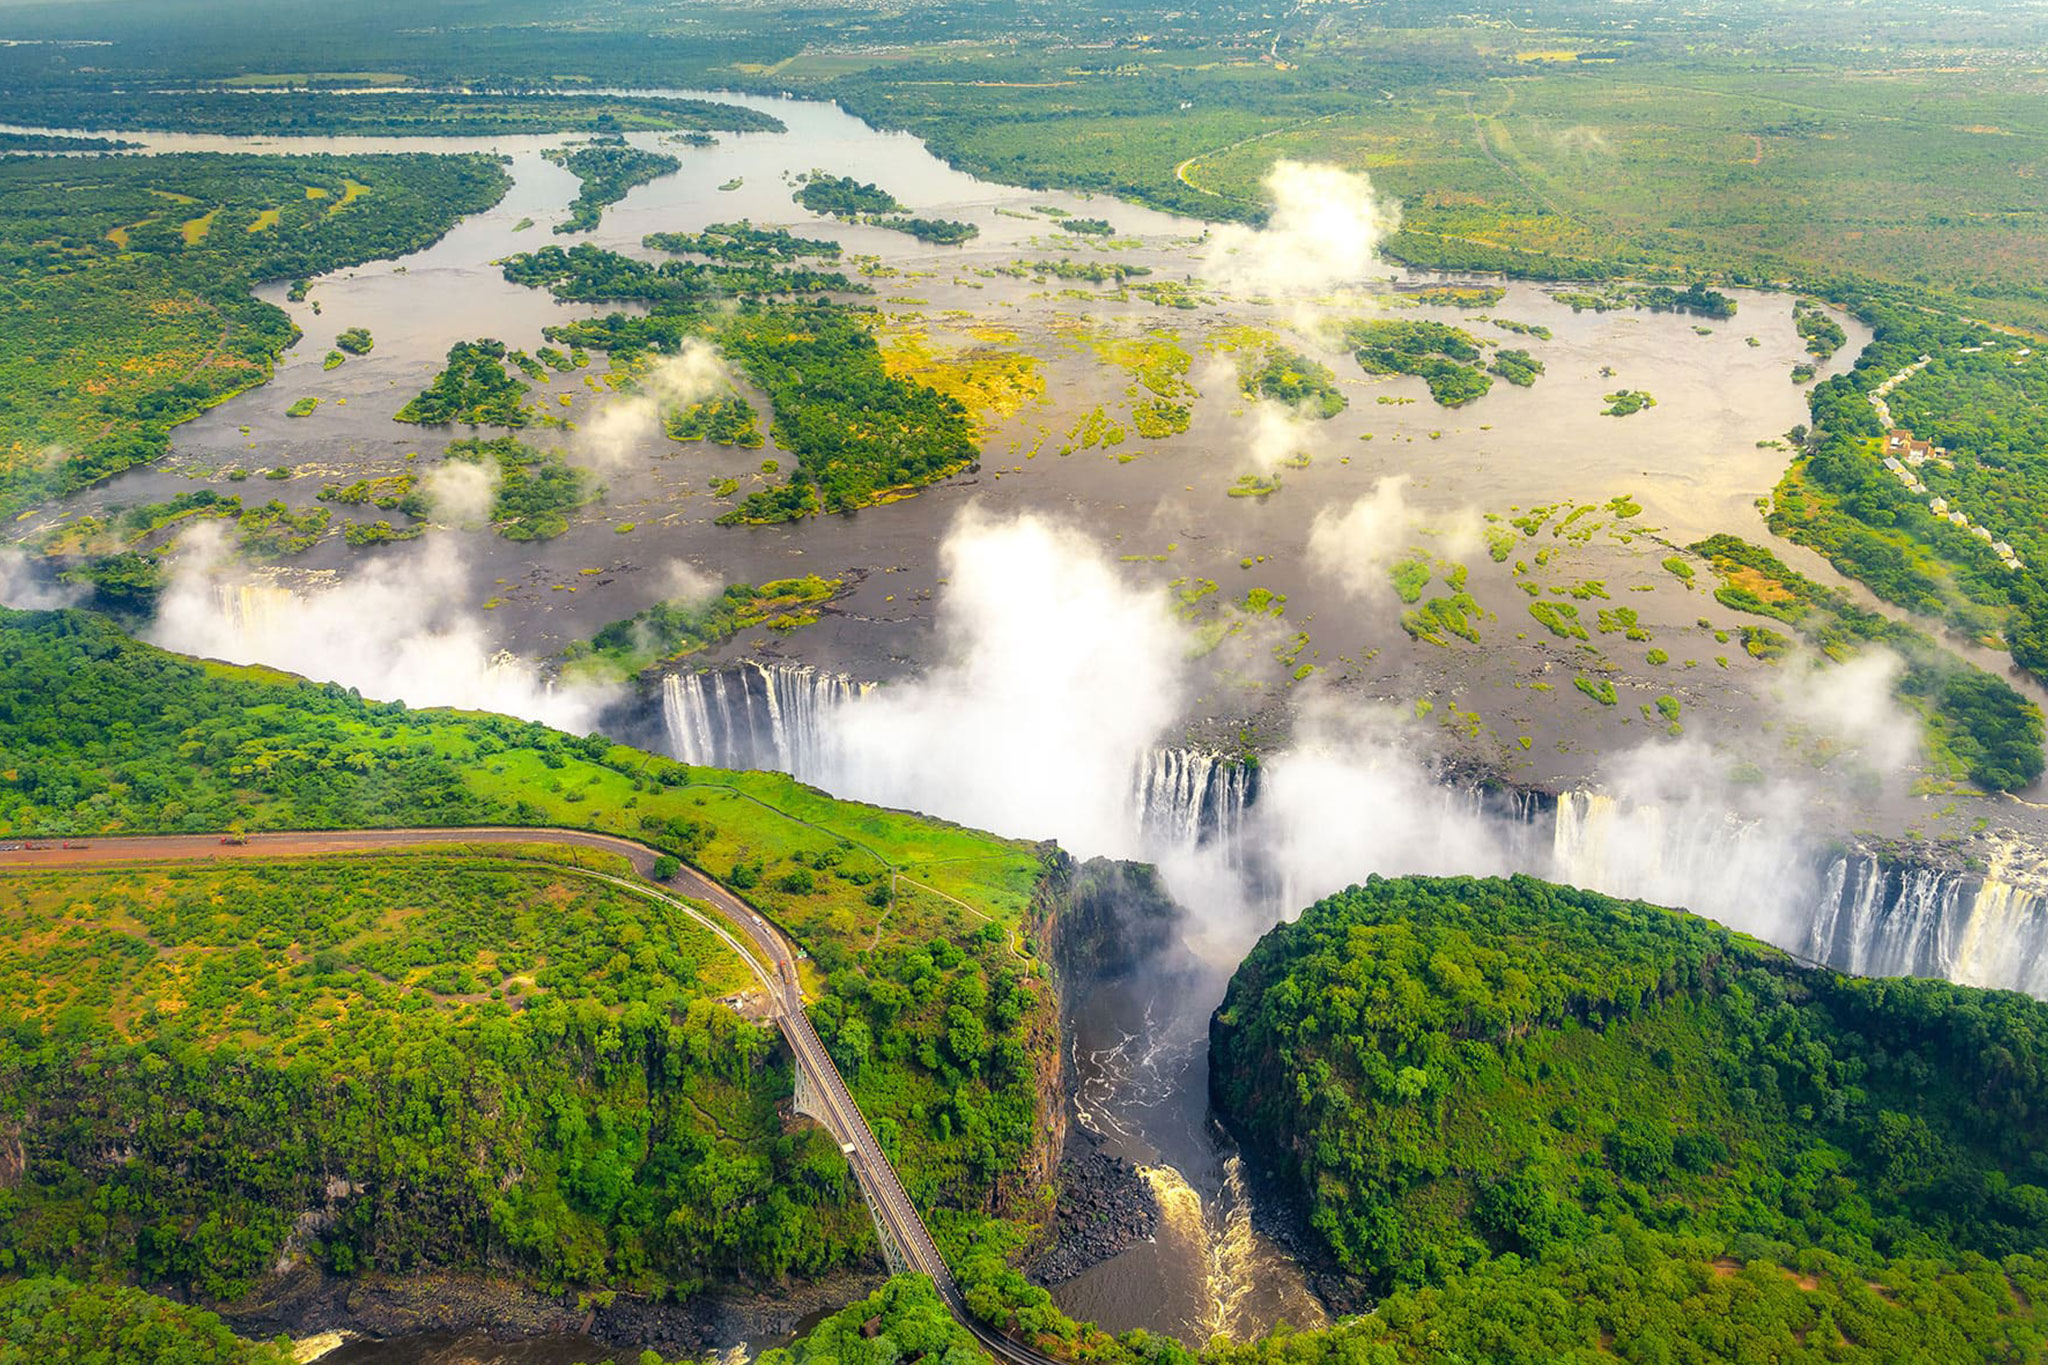 header-victoria-falls-in-zimbabwe-and-zambia-aerial-helicopter-photo-green-forest-around-amazing-majestic-waterfalls-of-africa-livingston-bridge-above-the-river_226711778.jpg